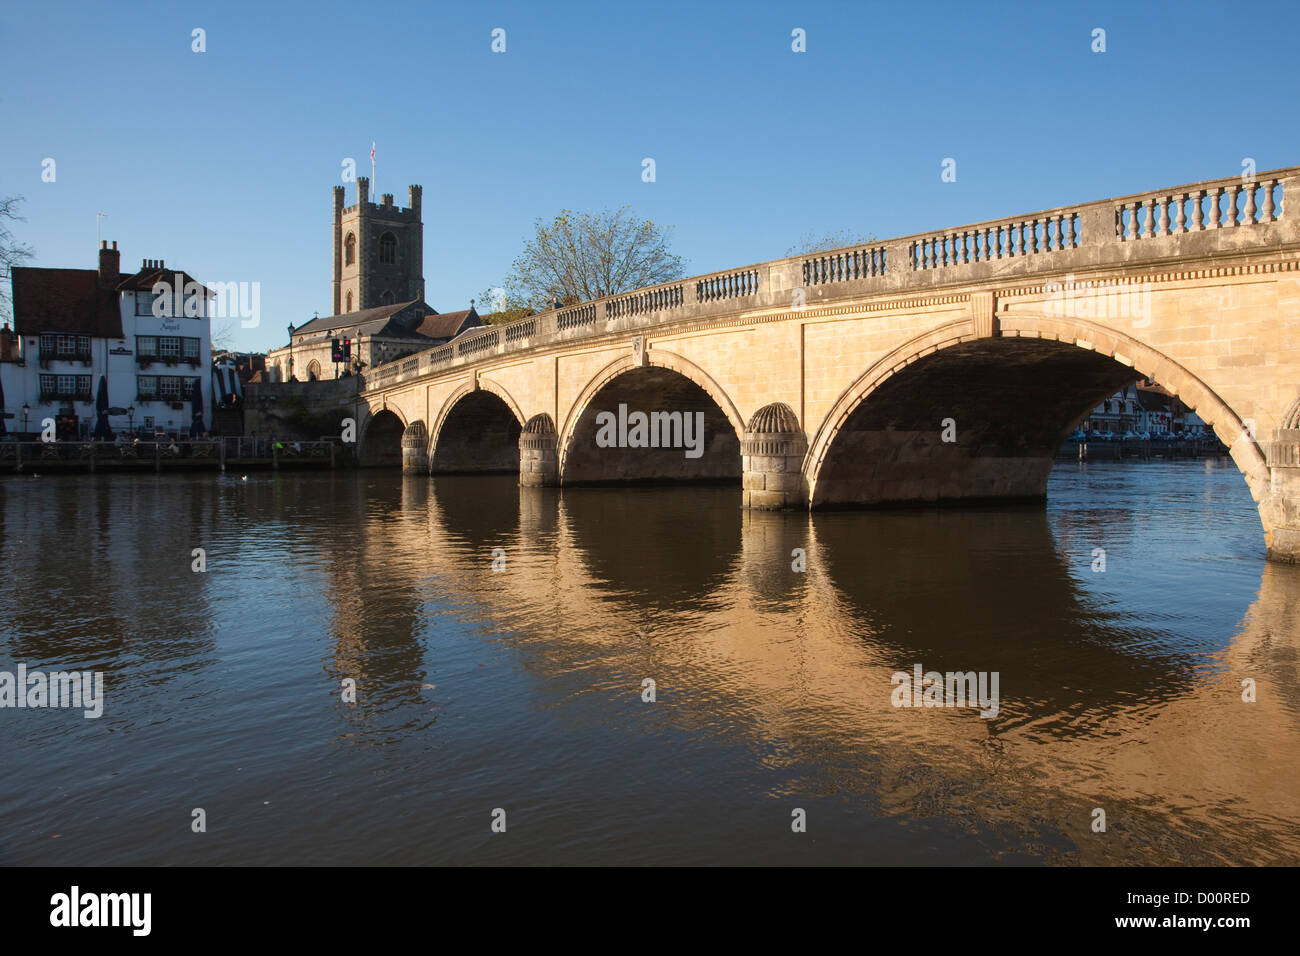 Henley Bridge crossing the River Thames, Church of St Mary in background, Henley on Thames, Oxfordshire, England, United Kingdom Stock Photo